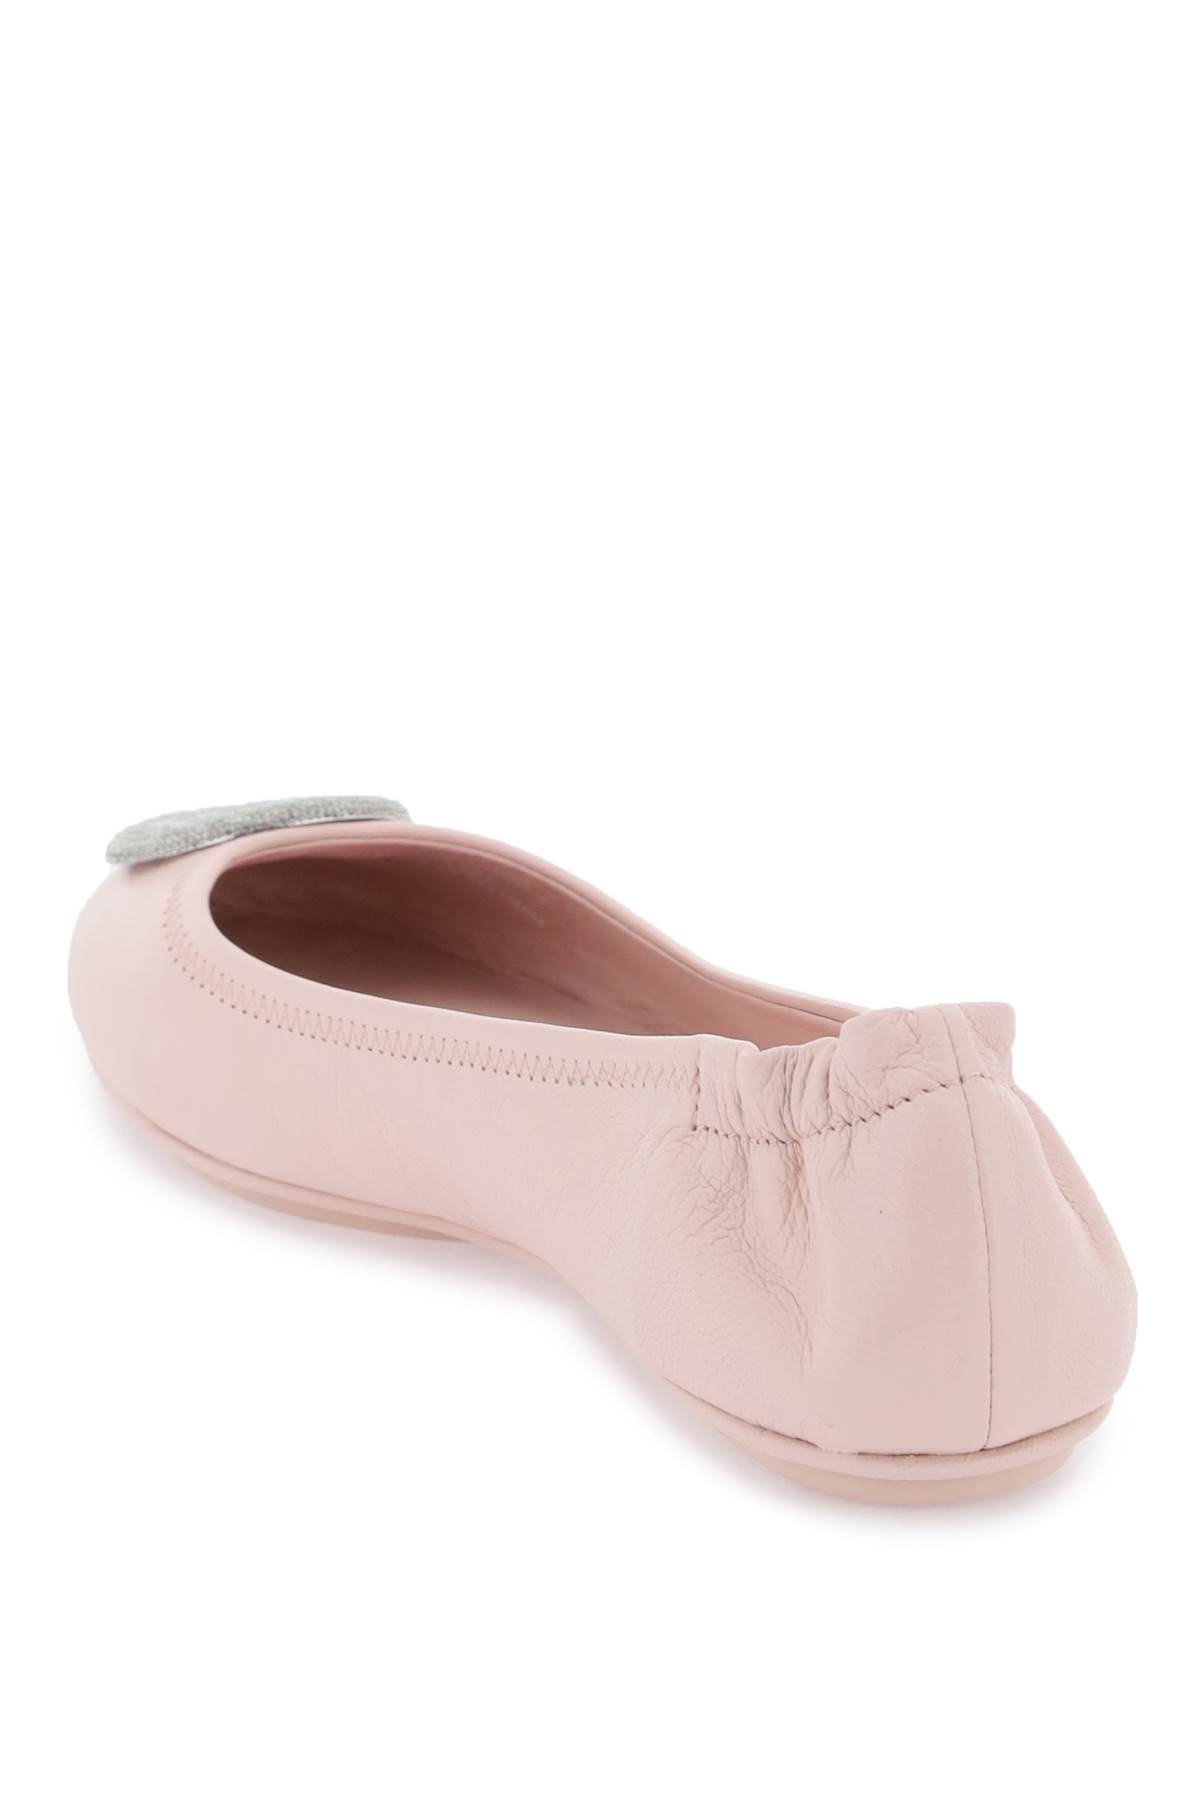 Shop Tory Burch Minnie Travel Ballet Flats In Shell Pink Silver (pink)